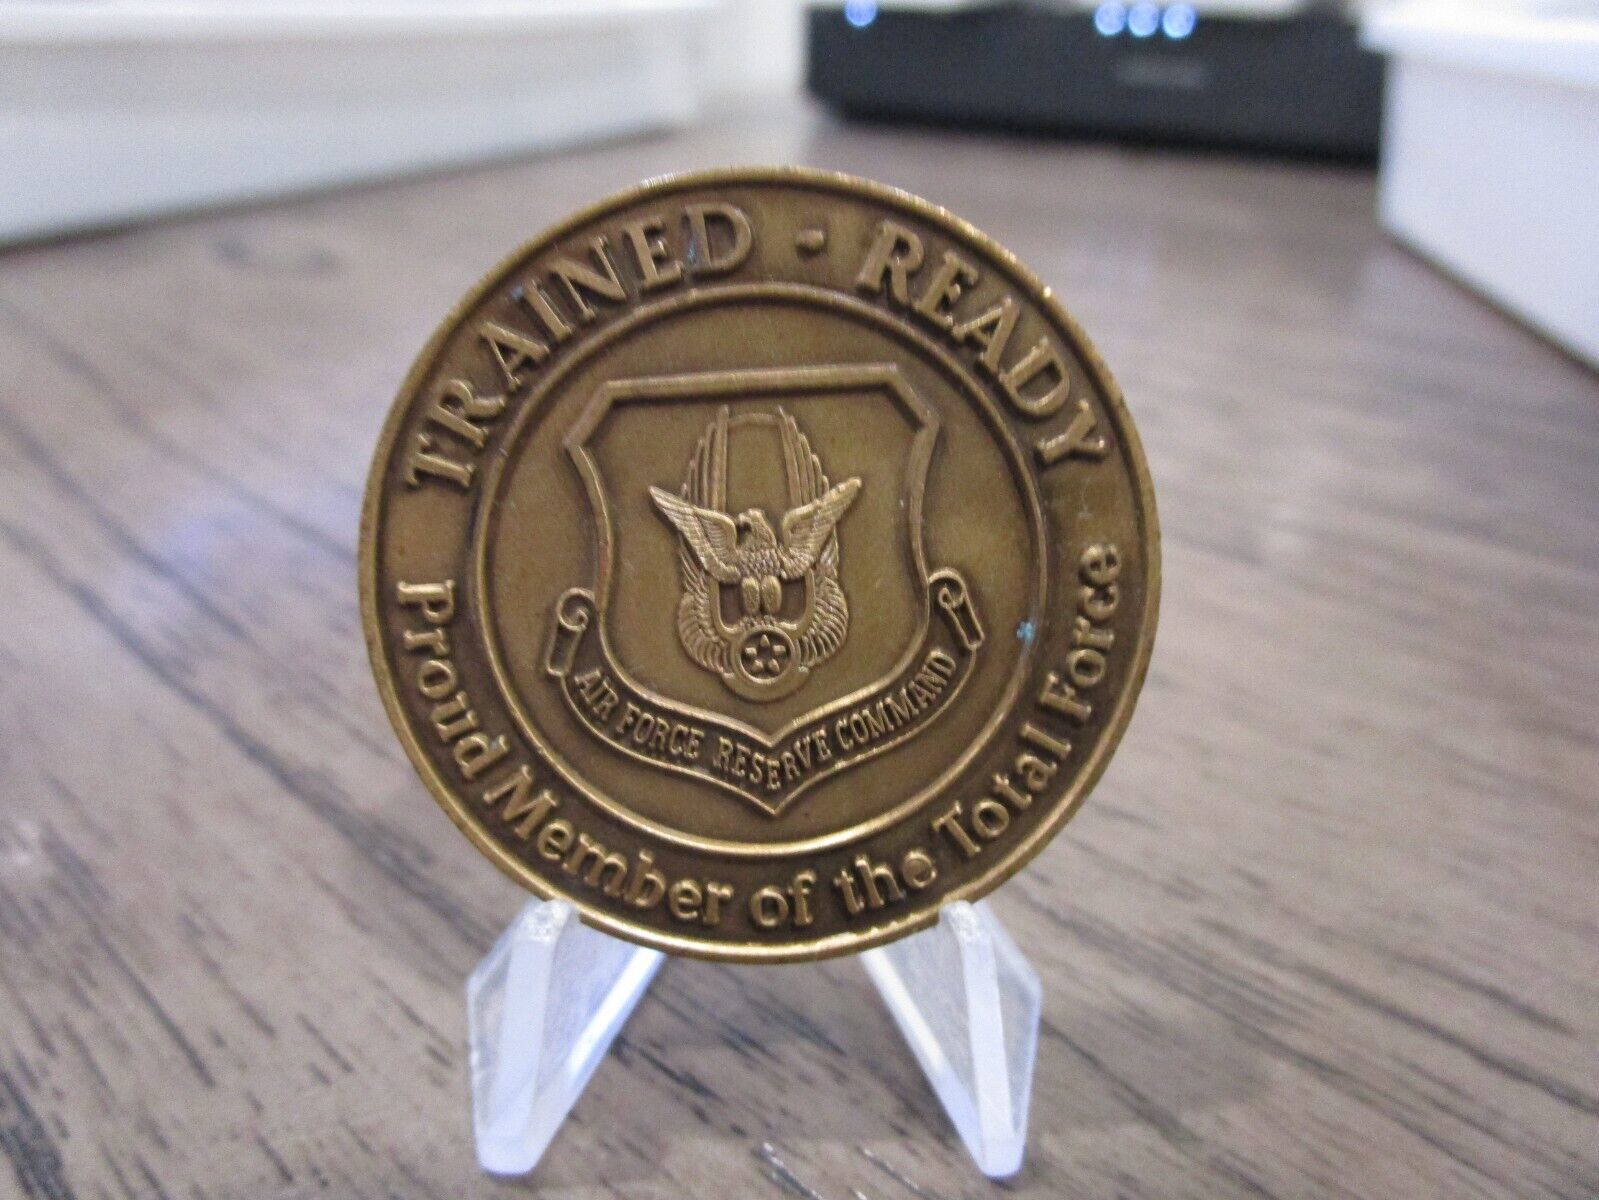 Primary image for Air Force Reserve Command Challenge Coin #922Q